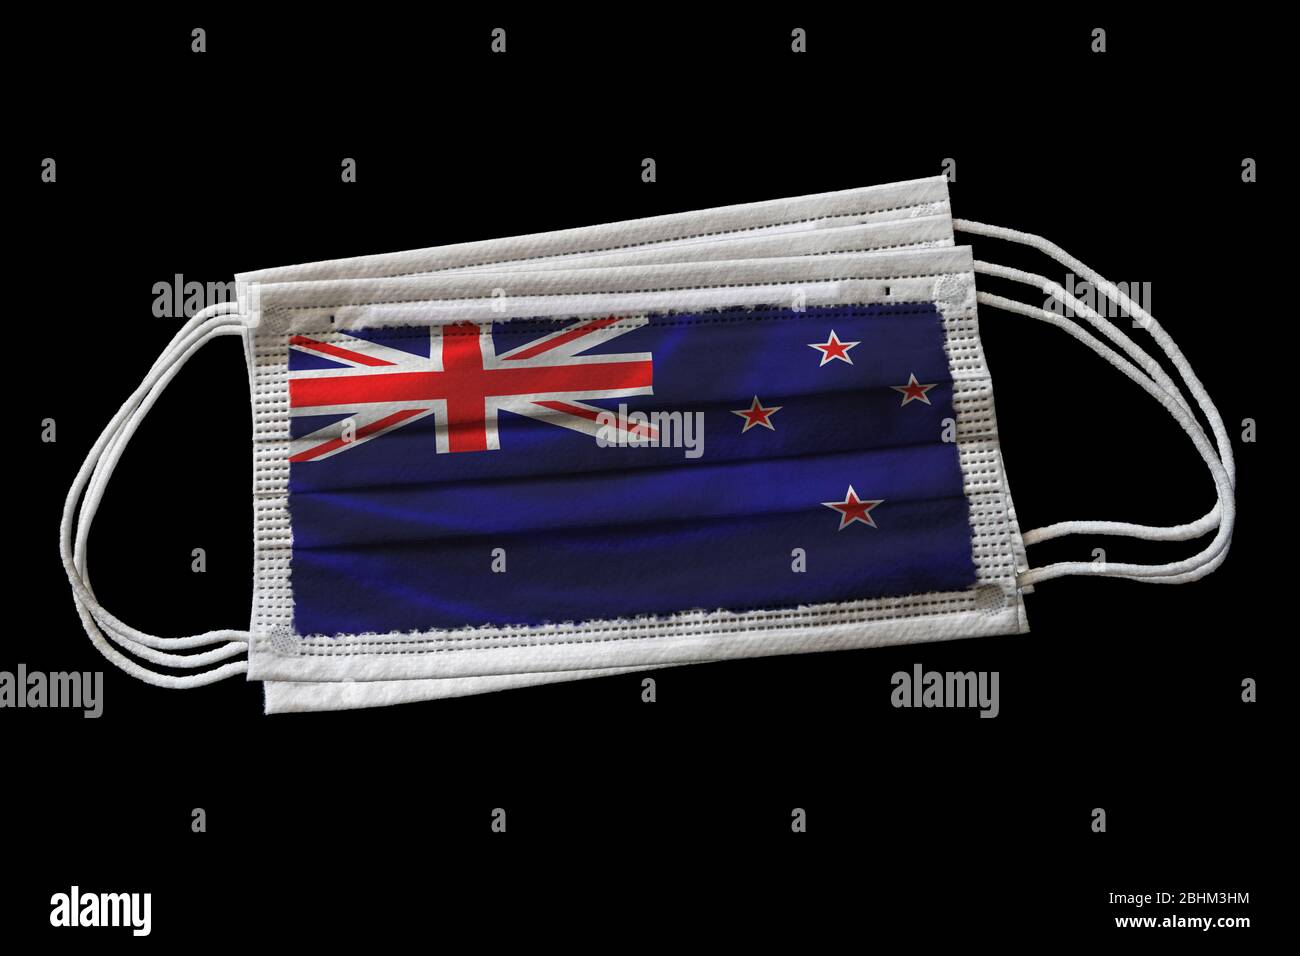 Multiple surgical face masks with New Zealand flag printed. Isolated on black background. Concept of face mask usage in the New Zealander effort to co Stock Photo